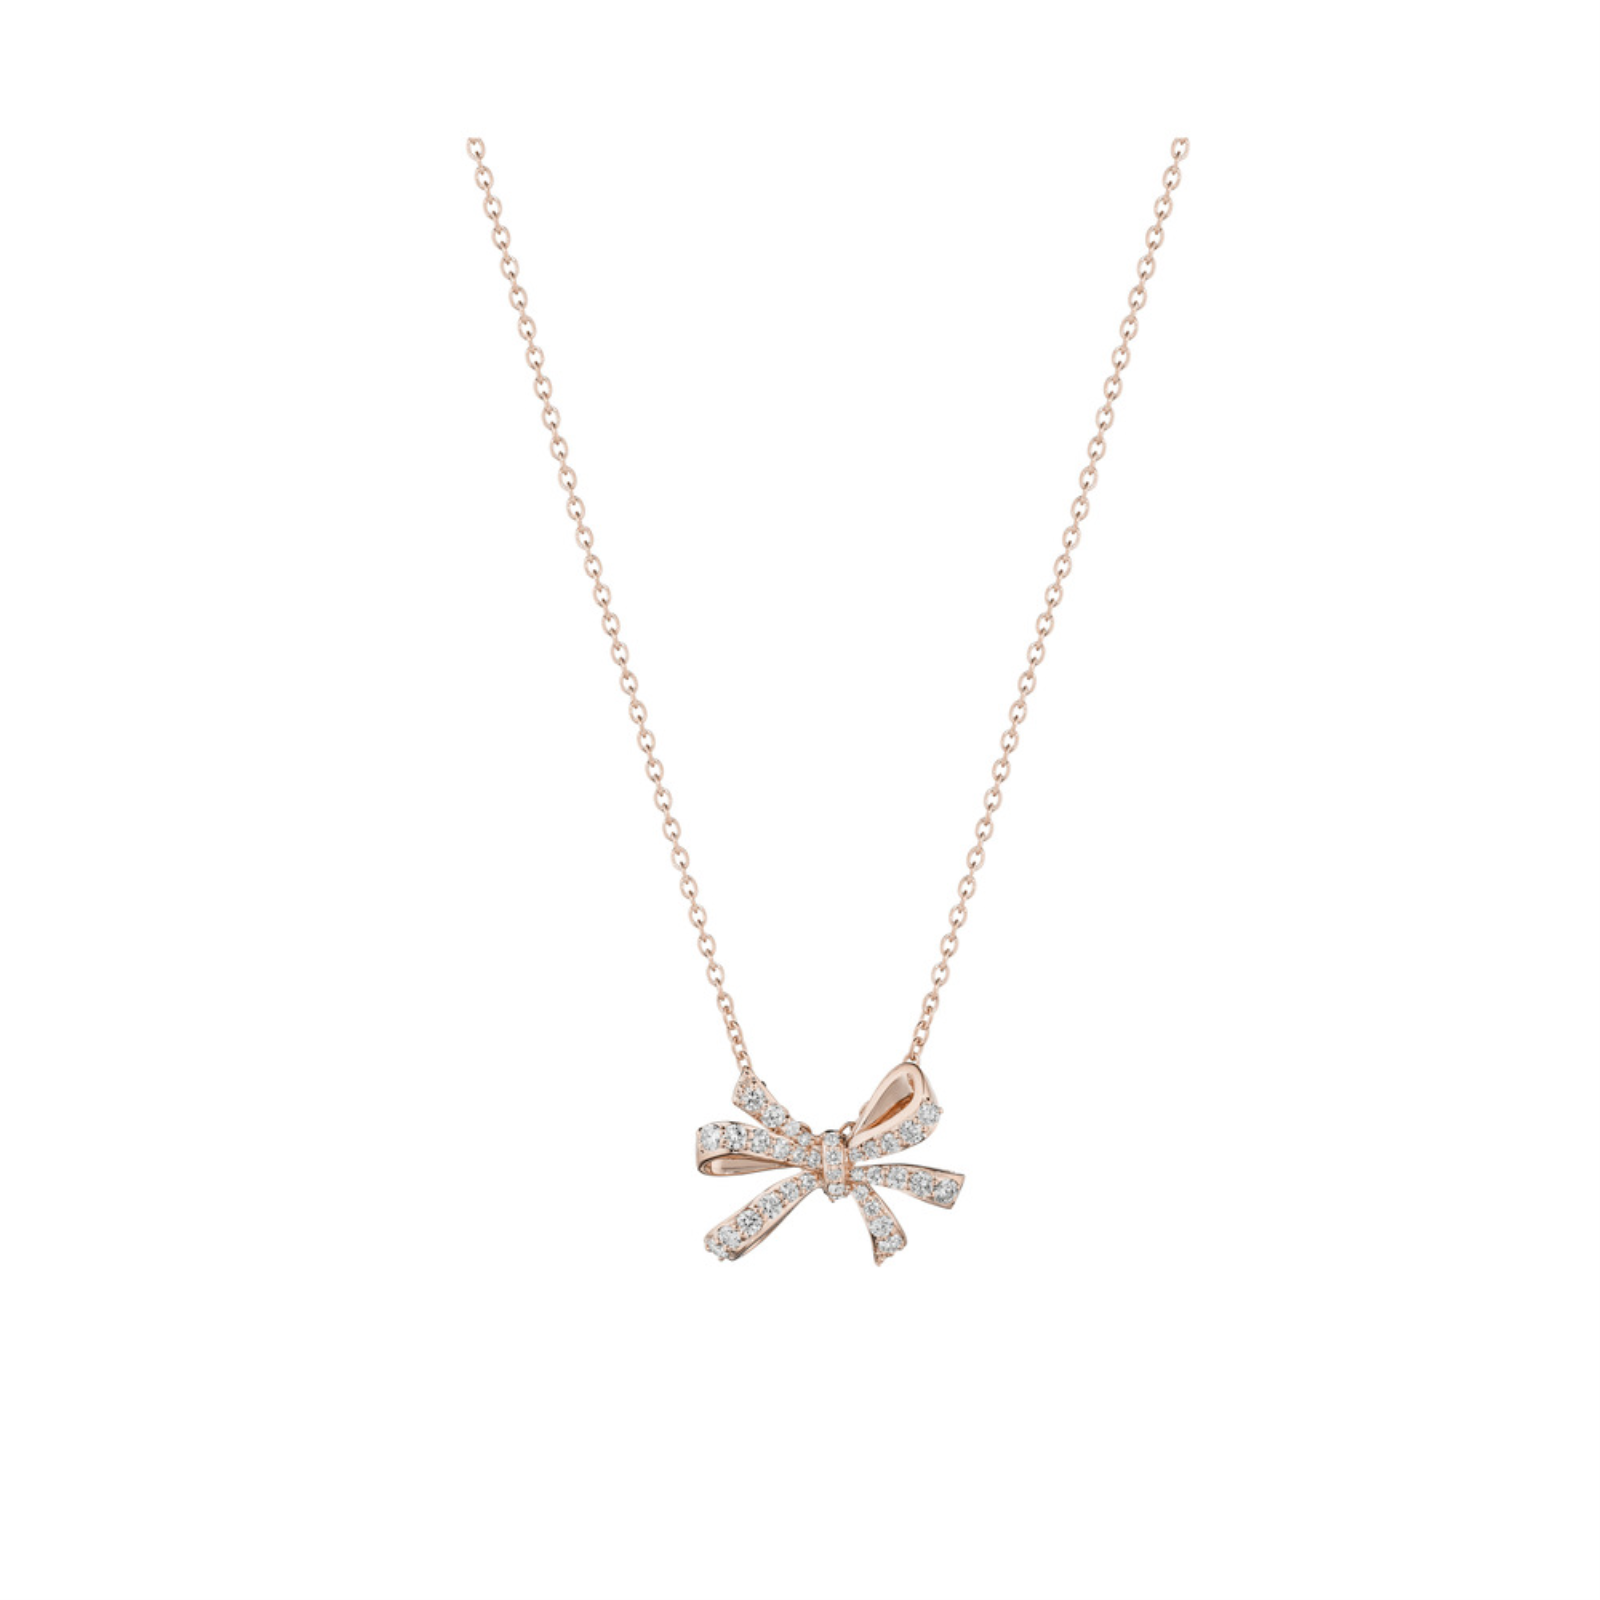 Rose Gold and Diamond Bow Necklace